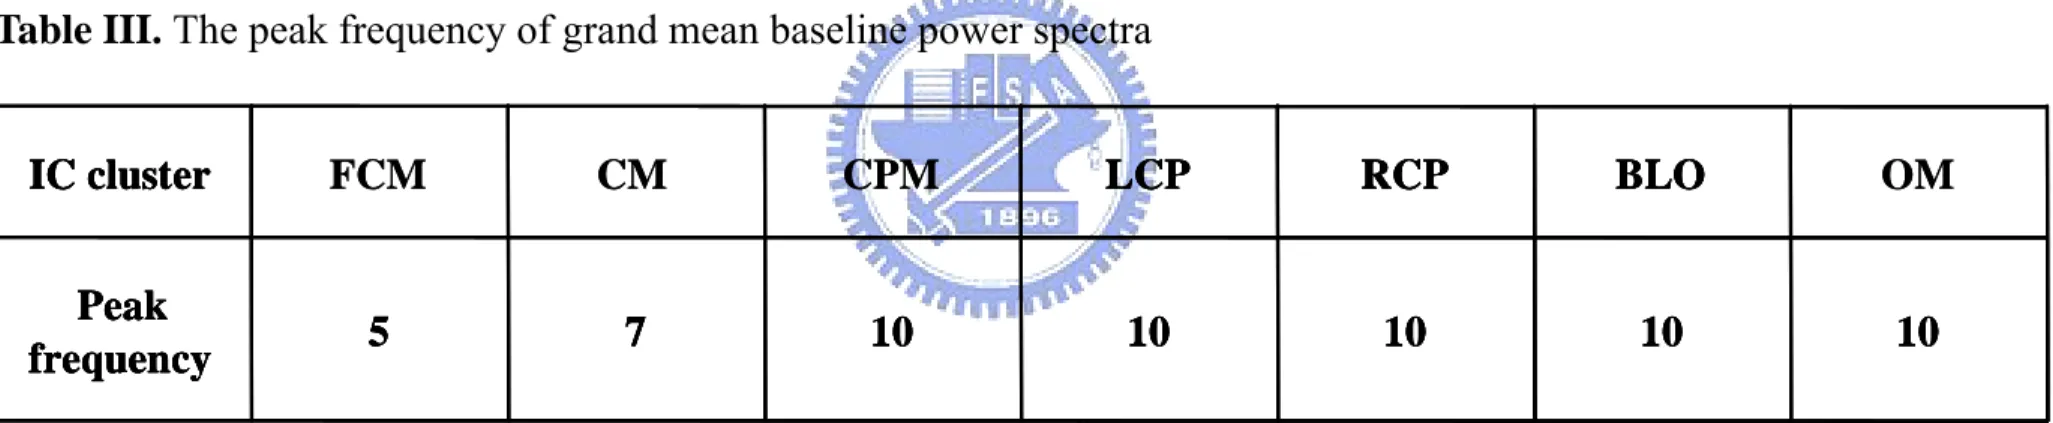 Table III. The peak frequency of grand mean baseline power spectra  10101010107Peak5 frequency OMBLORCPLCPCPMCMFCMIC cluster10101010107Peak5frequencyBLORCPLCPIC cluster10101010107Peak5frequencyOMBLORCPLCPCPMCMFCMIC cluster10101010107Peak5frequencyBLORCPLCP